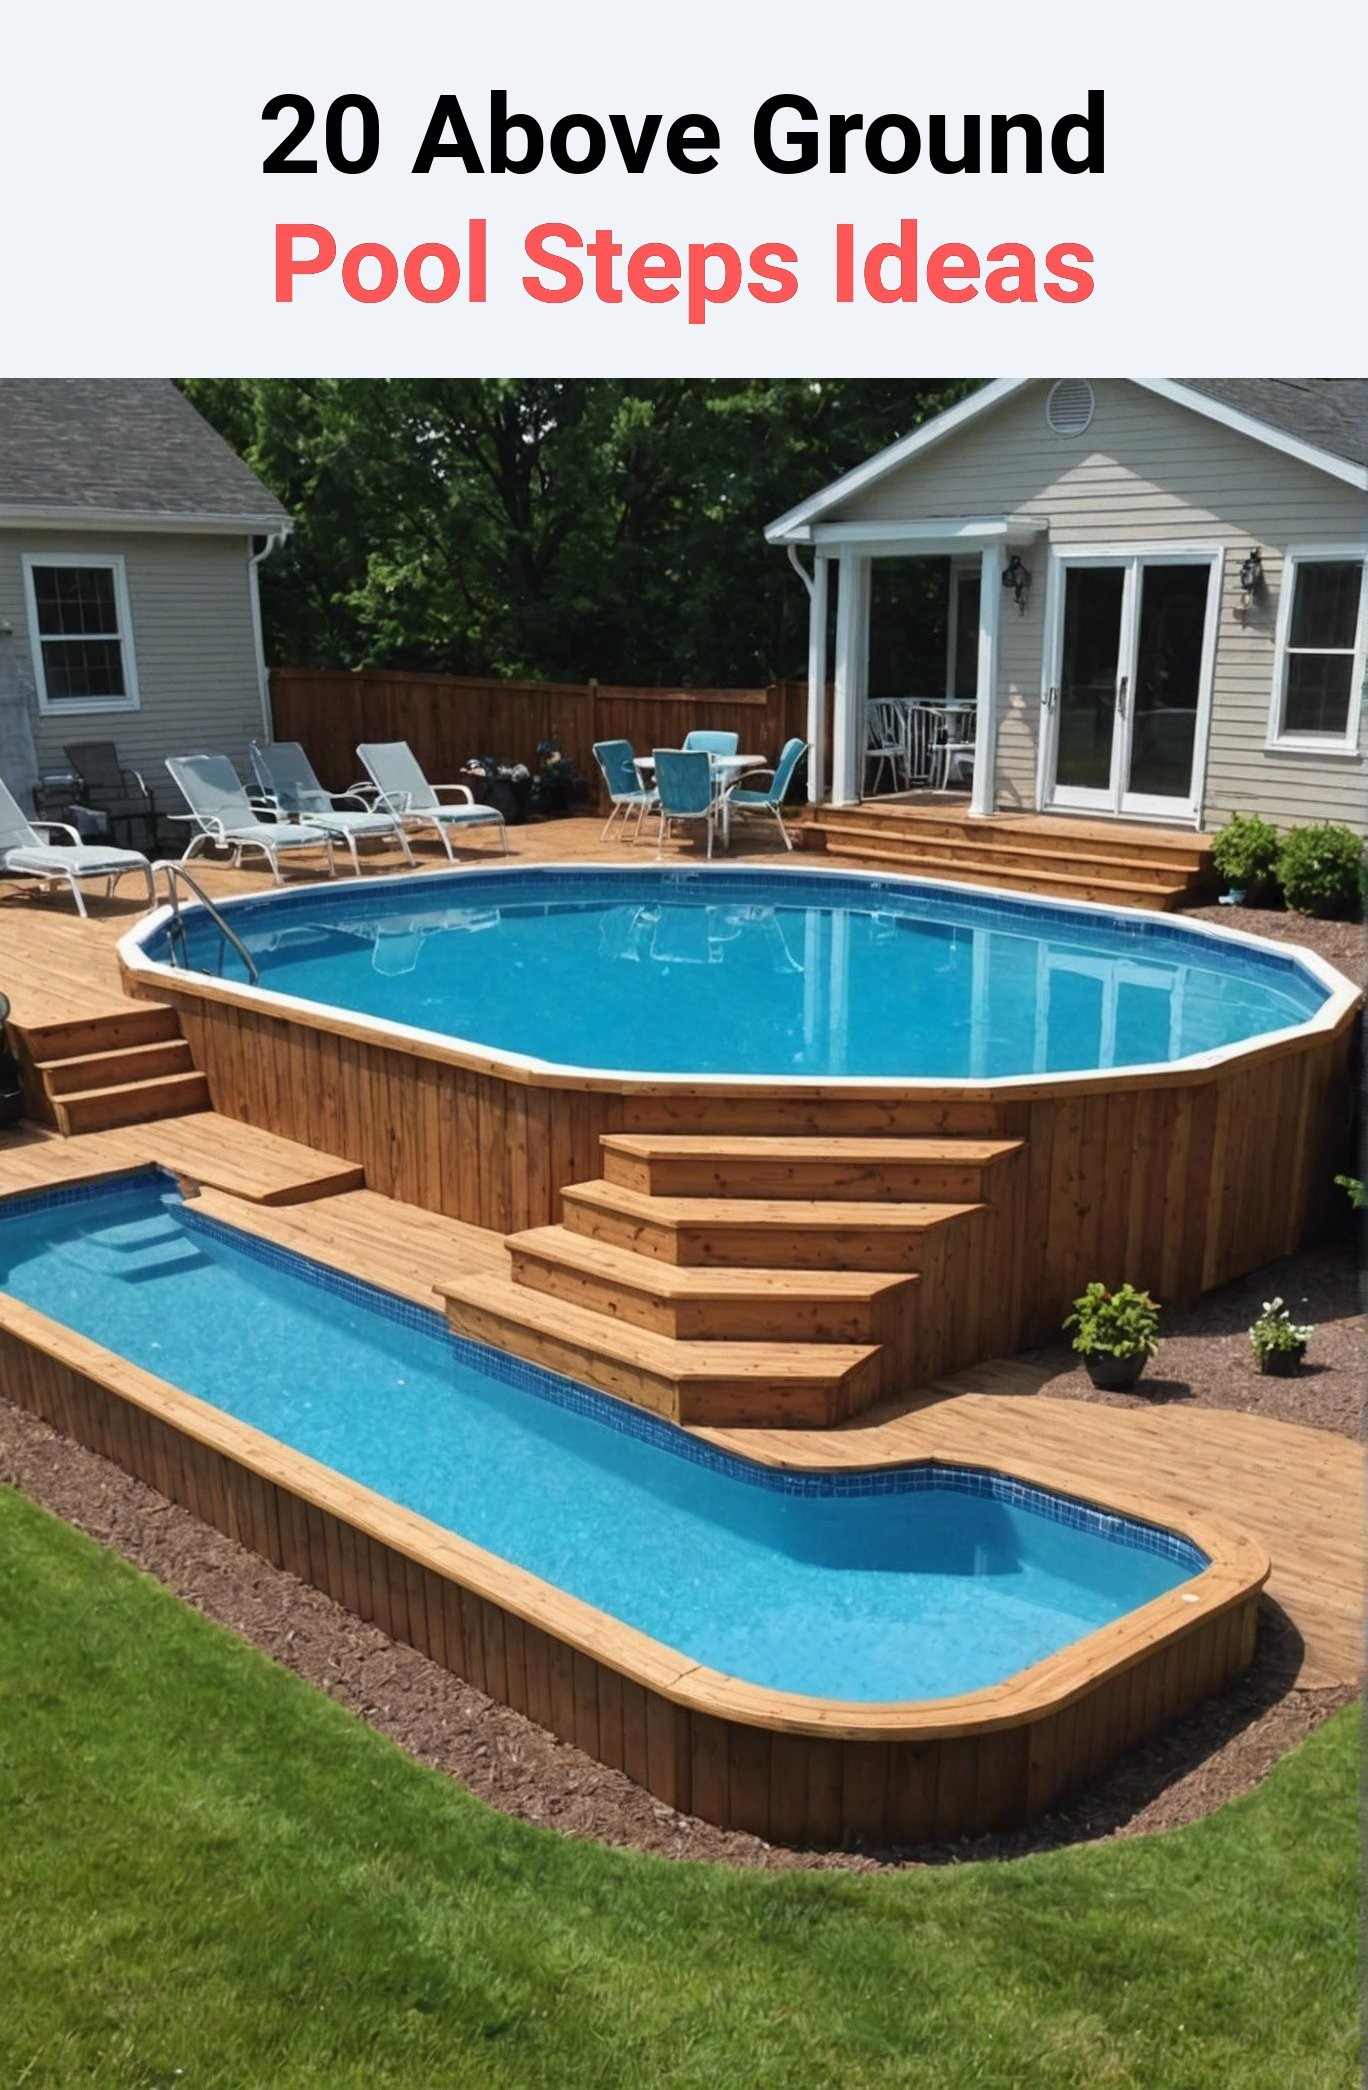 20 Above Ground Pool Steps Ideas